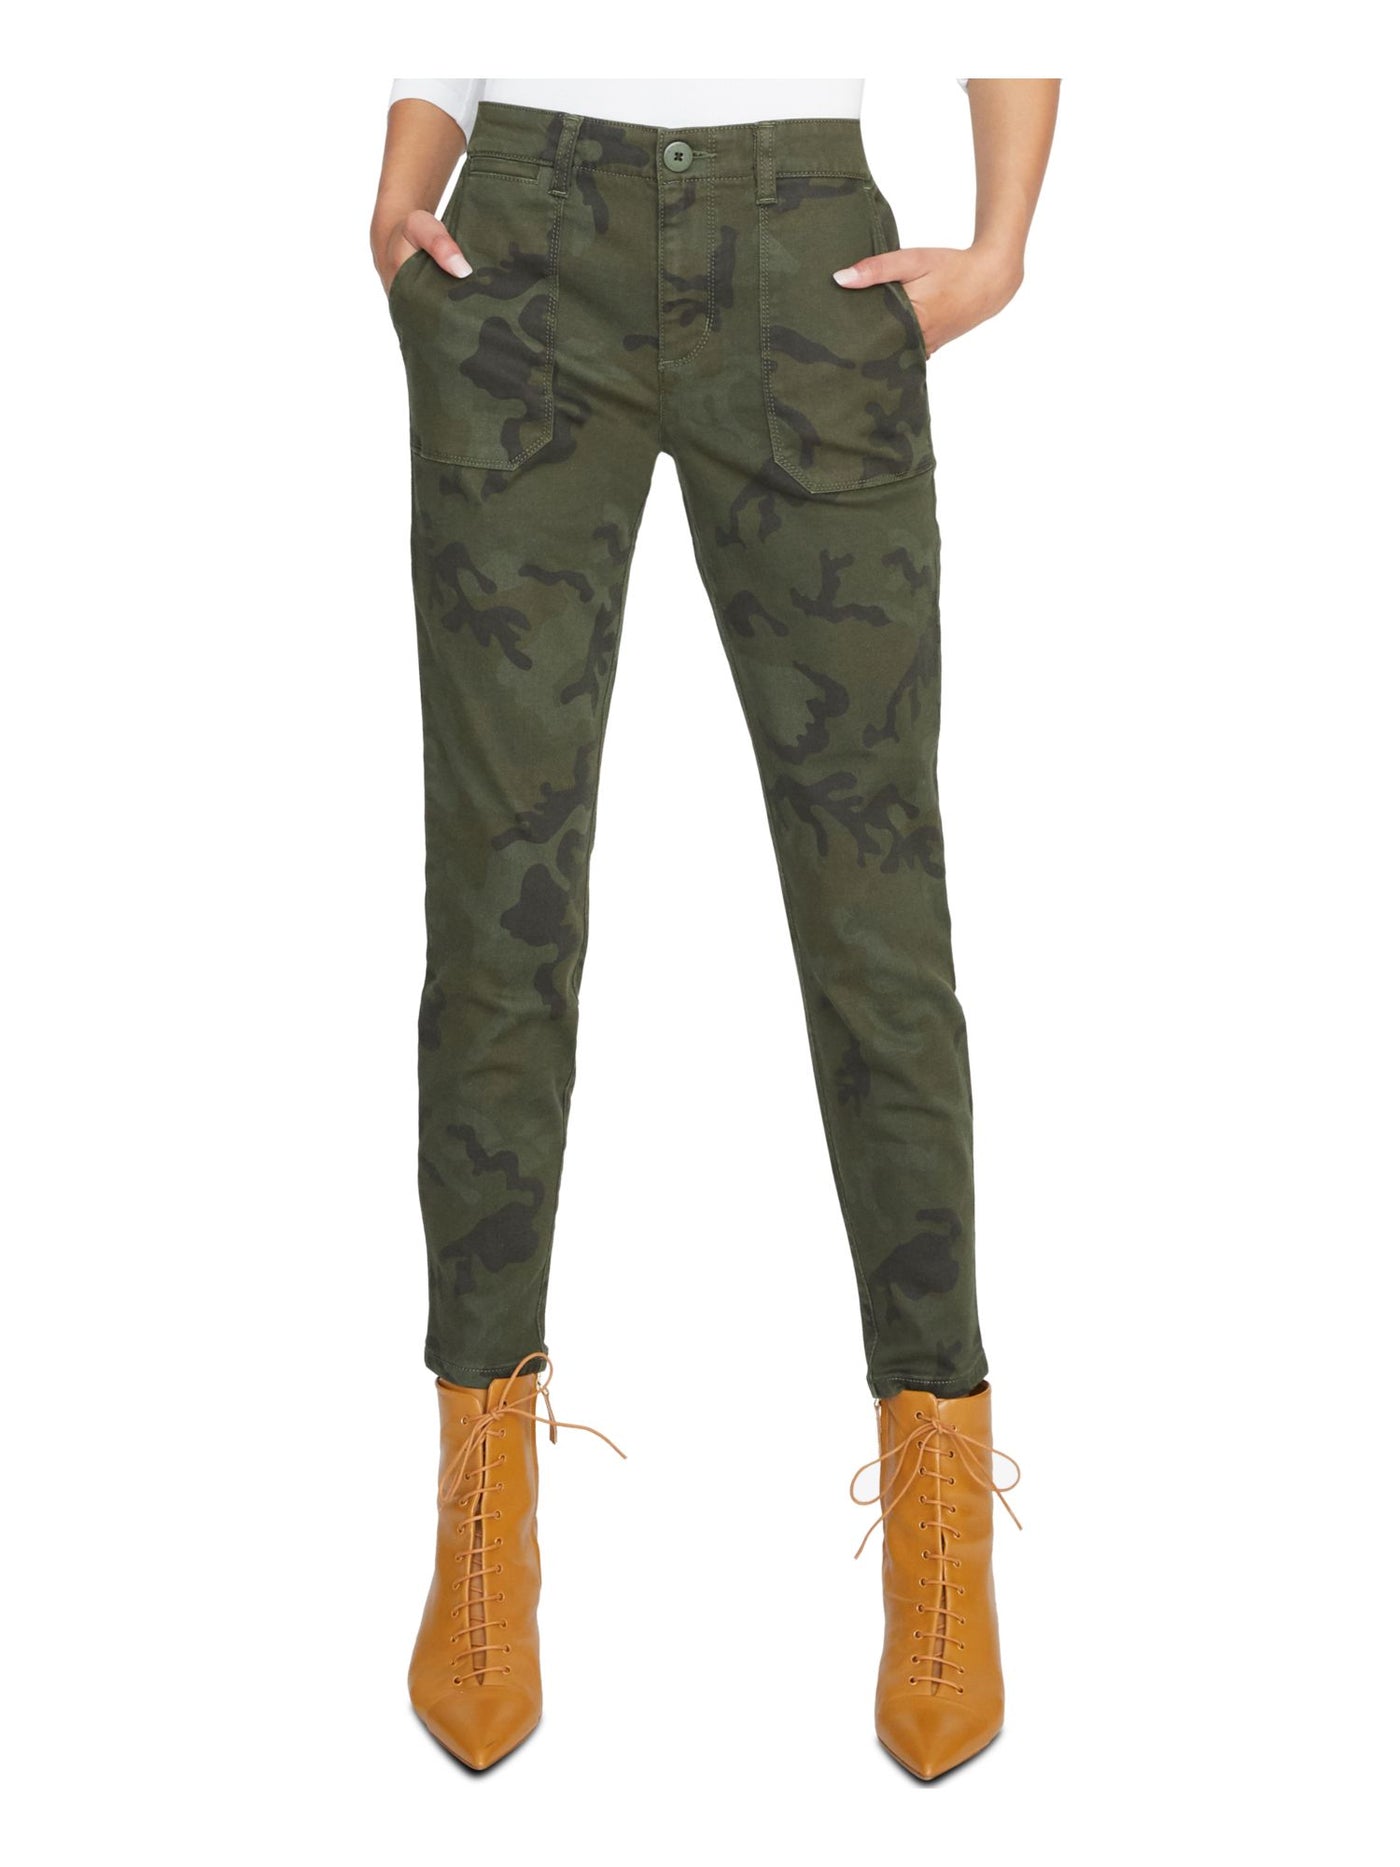 SANCTUARY Womens Green Zippered Pocketed Ankle Camouflage Skinny Jeans Juniors 25